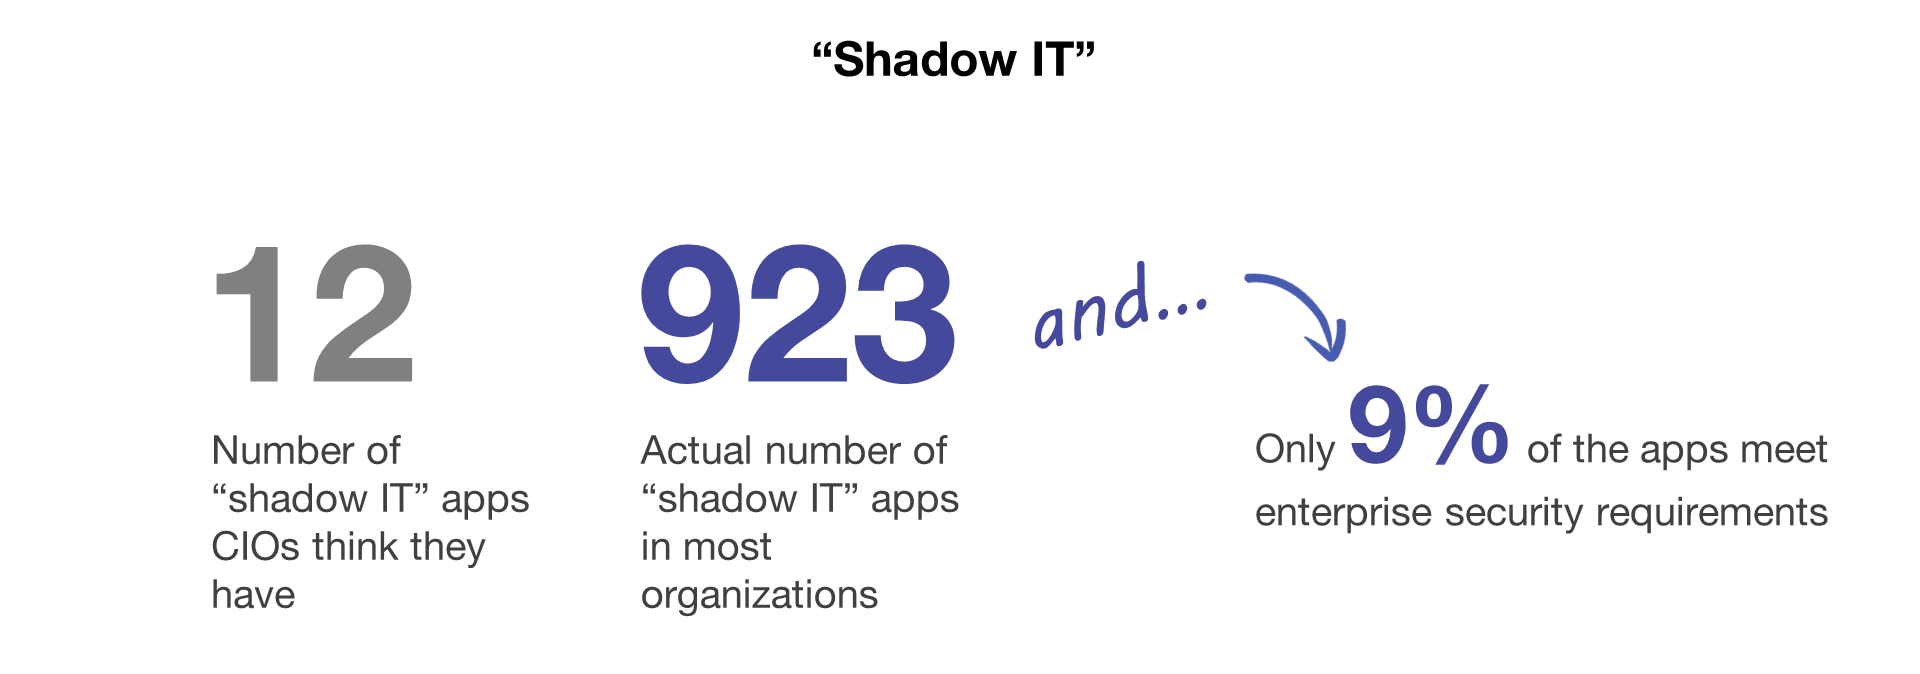 CIOs underestimate the number of shadow IT apps